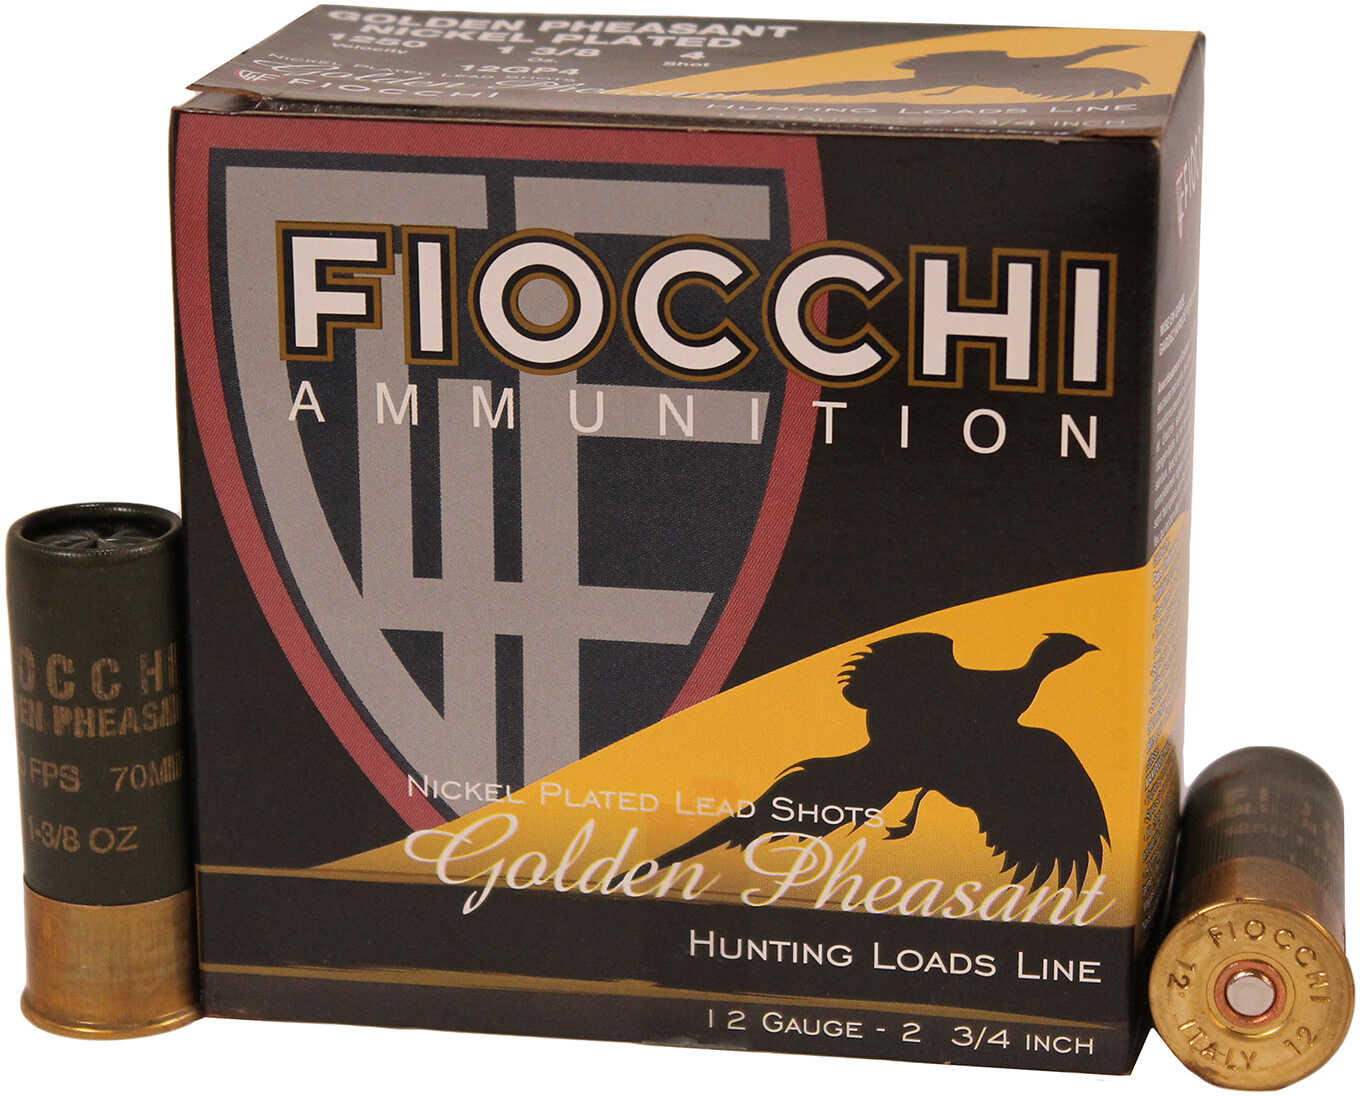 12 Gauge 25 Rounds Ammunition Fiocchi Ammo 2 3/4" 1 3/8 oz Nickel-Plated Lead #4